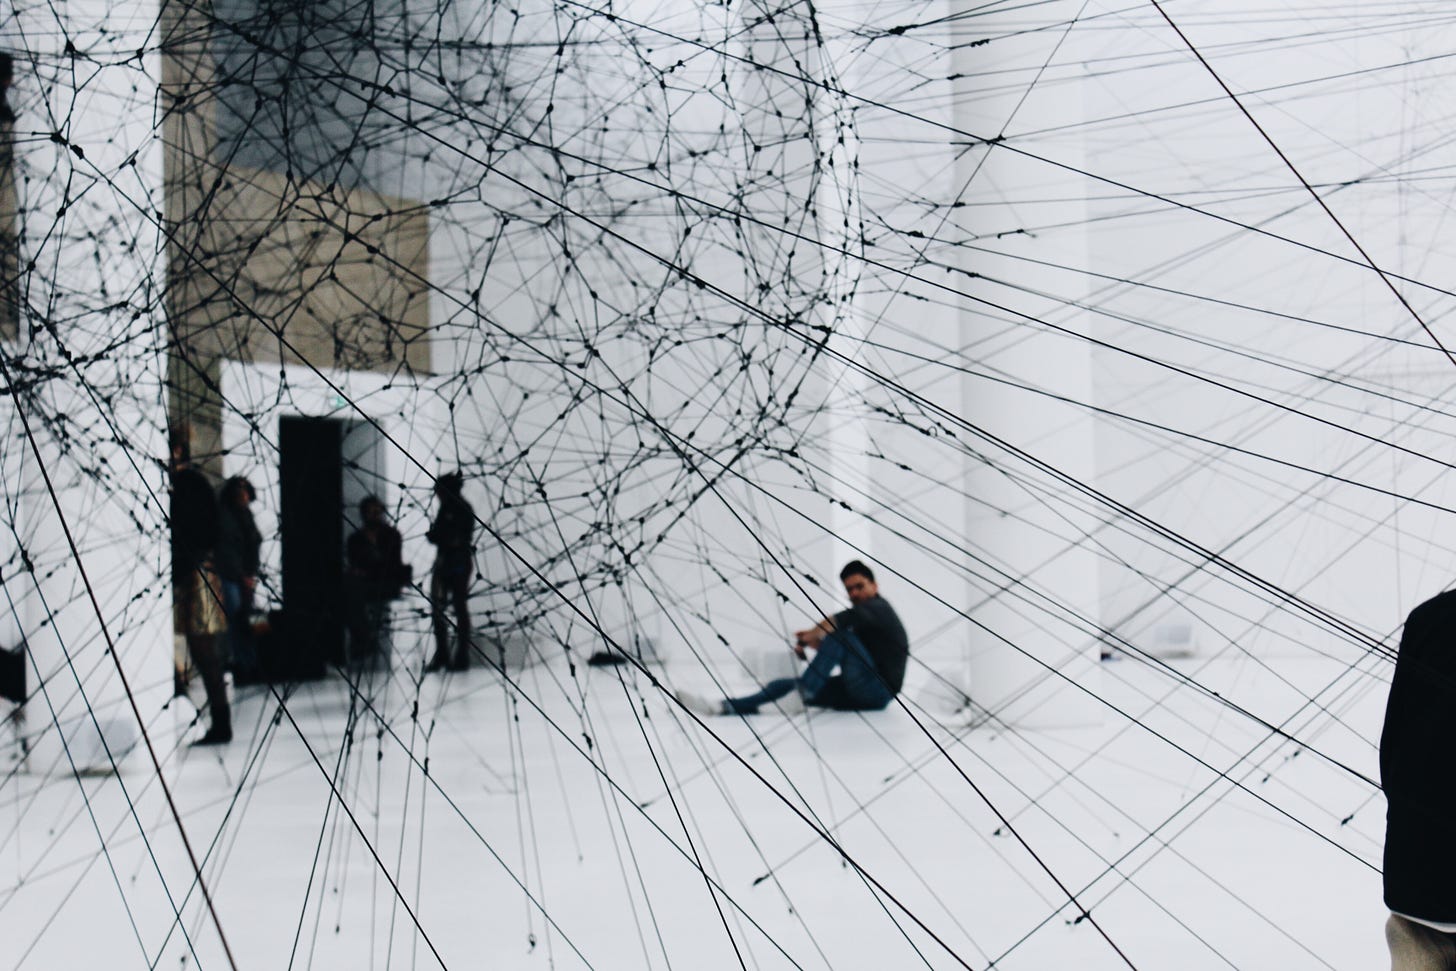 Black clad peoplein a gallery viewed through an abstract geometric black string installation